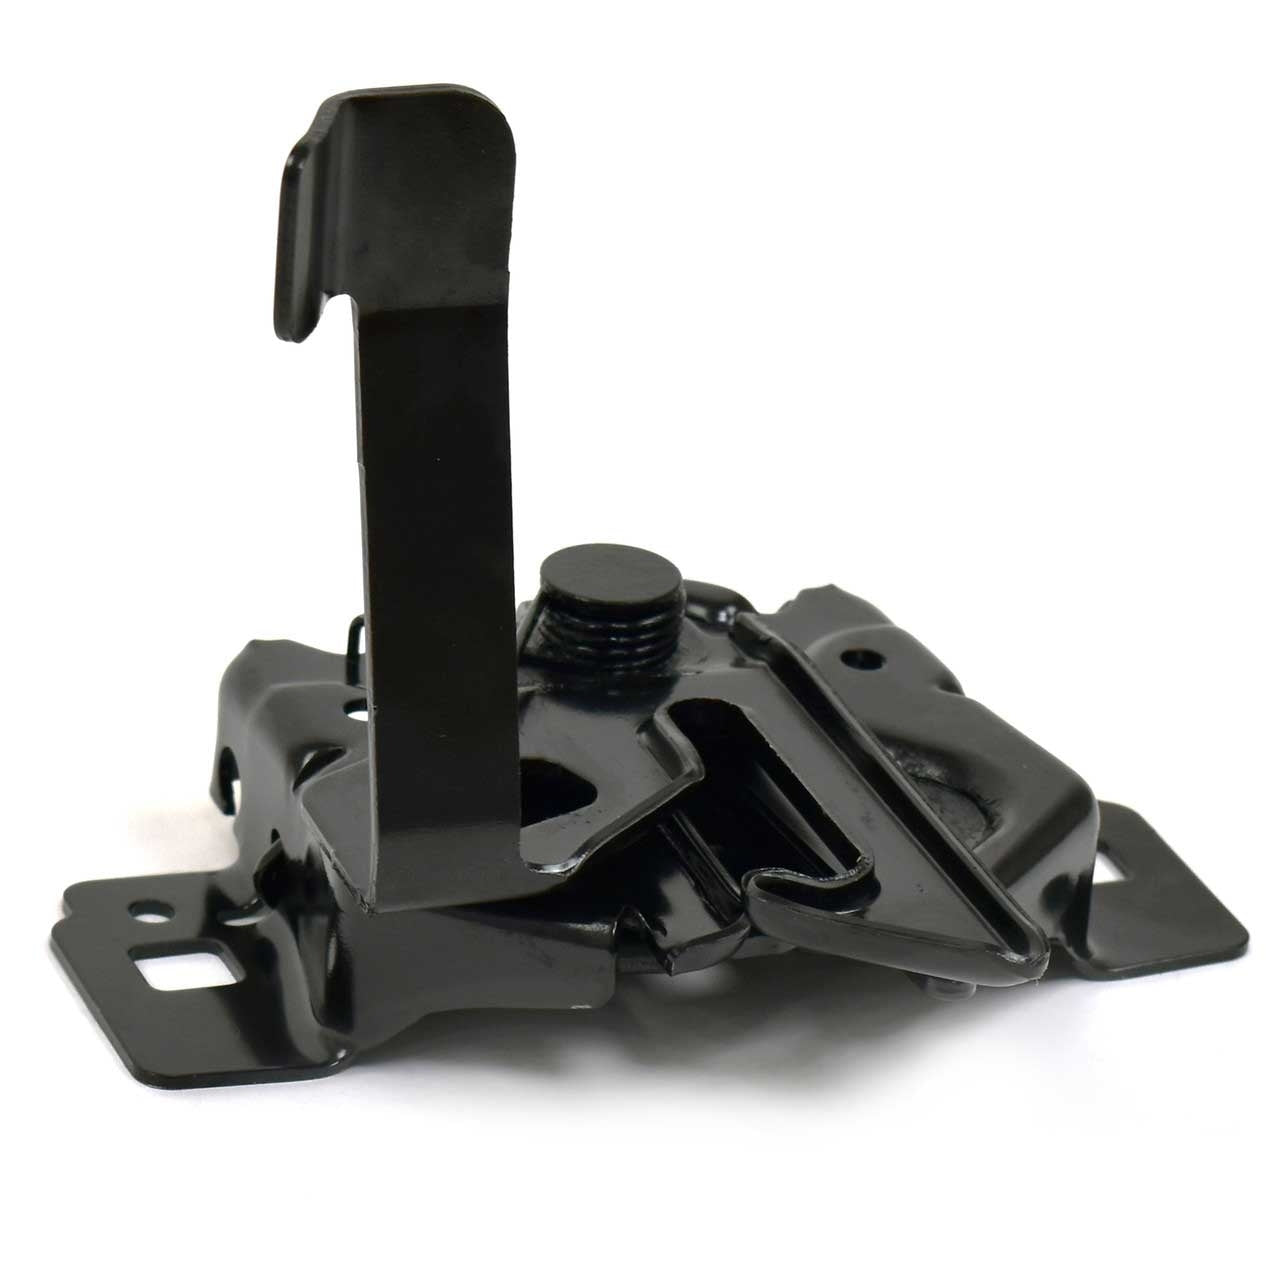 2010-2014 Ford Mustang Engine Hood Latch Lock Release Assembly Black